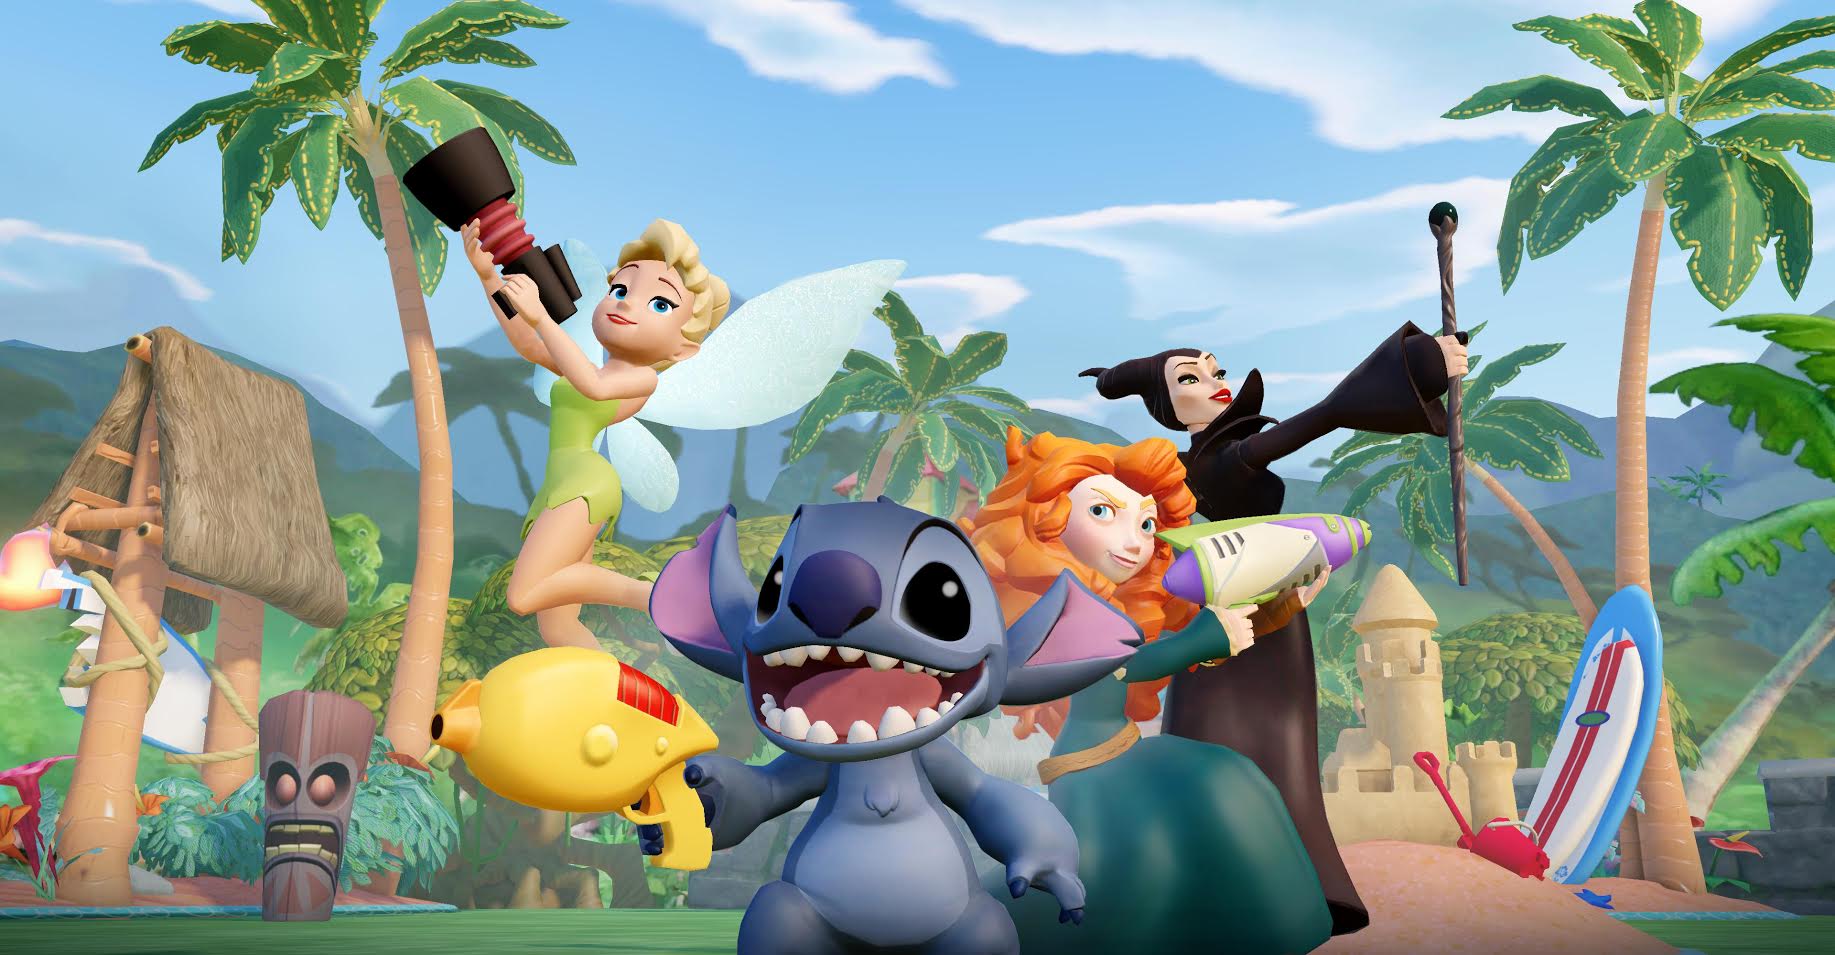 Stitch and Tinker Bell join Disney Infinity 2.0